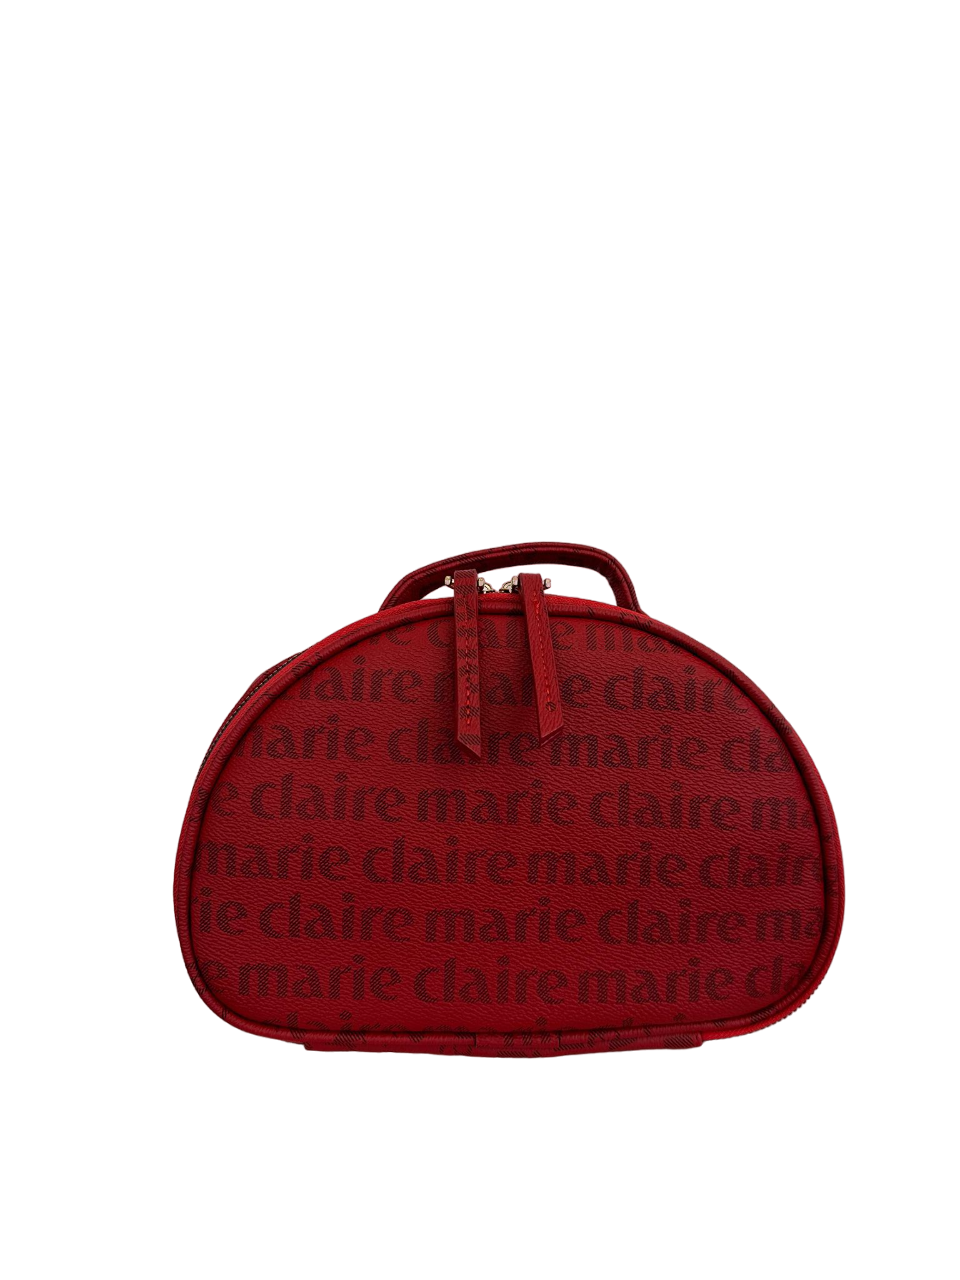 bags marie claire - Buy bags marie claire at Best Price in Malaysia |  h5.lazada.com.my